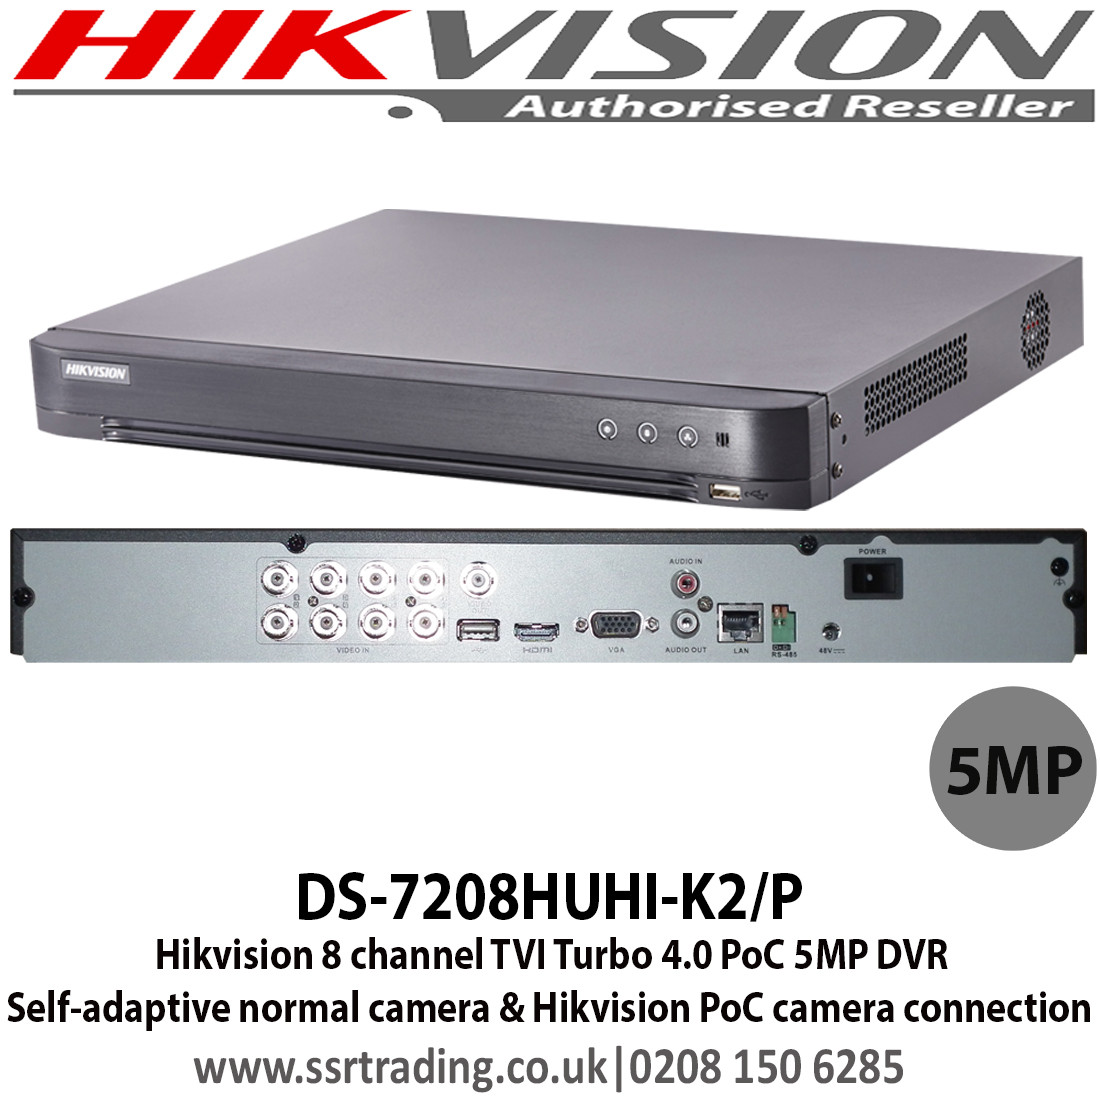 Hikvision 5mp Colorvu Camera Kit With 8 Channel Dvr The Kit Consists Of 1 X Ds 78huhi K2 P 8 X Ds 2ce72hft F 6tb Wd Purple Hard Drive 1 X Power Supply 8 X m Bnc Cable